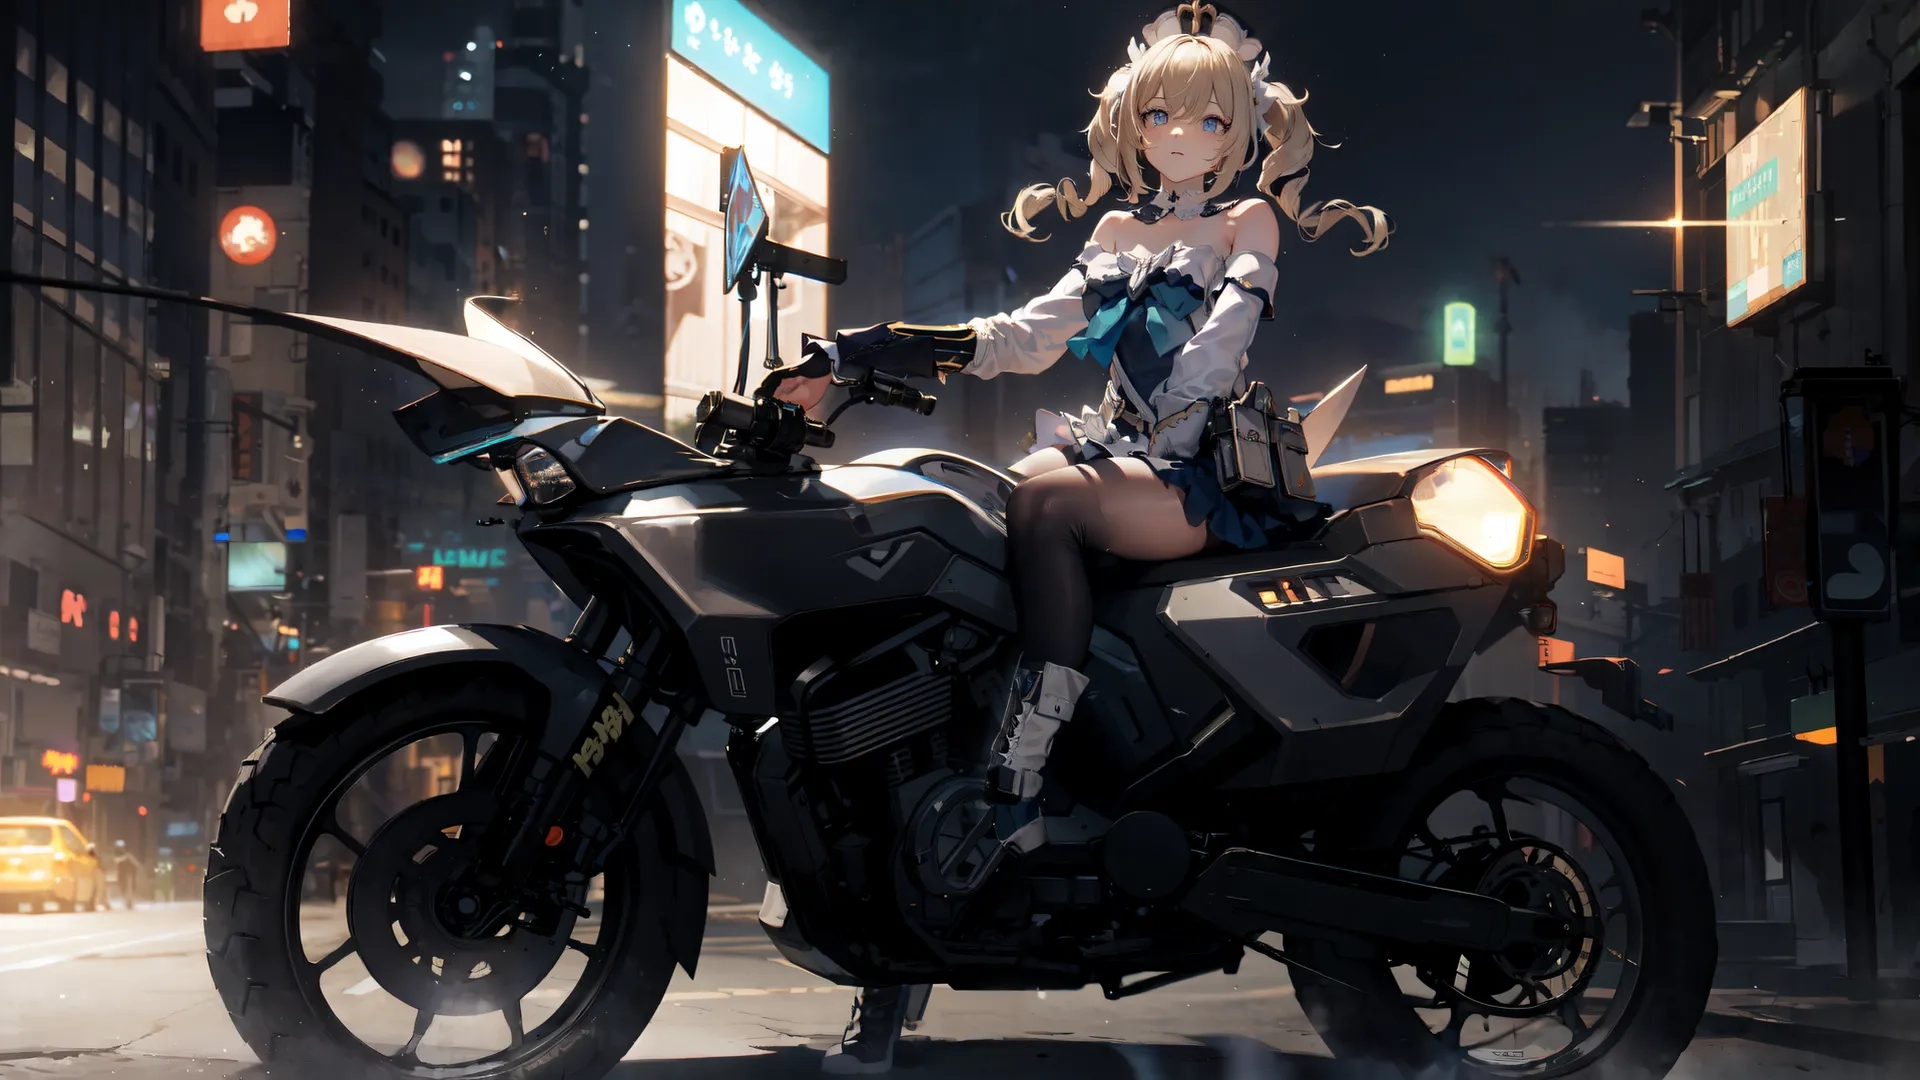 a woman is riding on top of a motorcycle in the street at night time with buildings in the background and the lights all glowing from the sky
